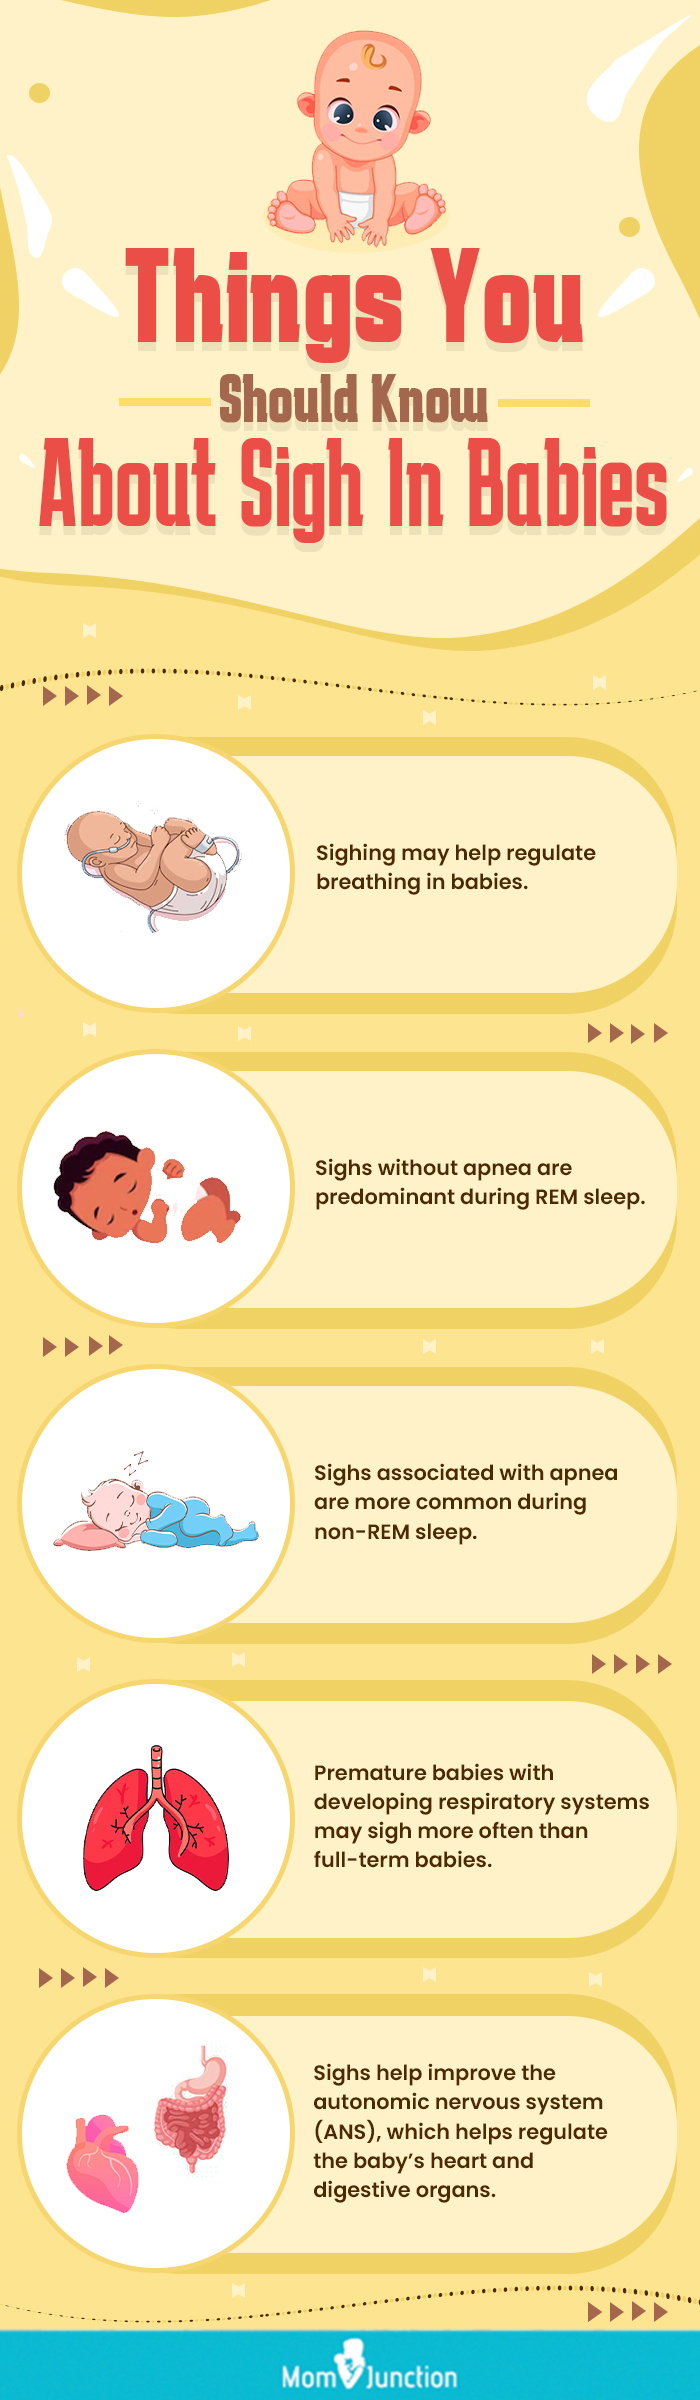 things you should know about sigh in babies (infographic)